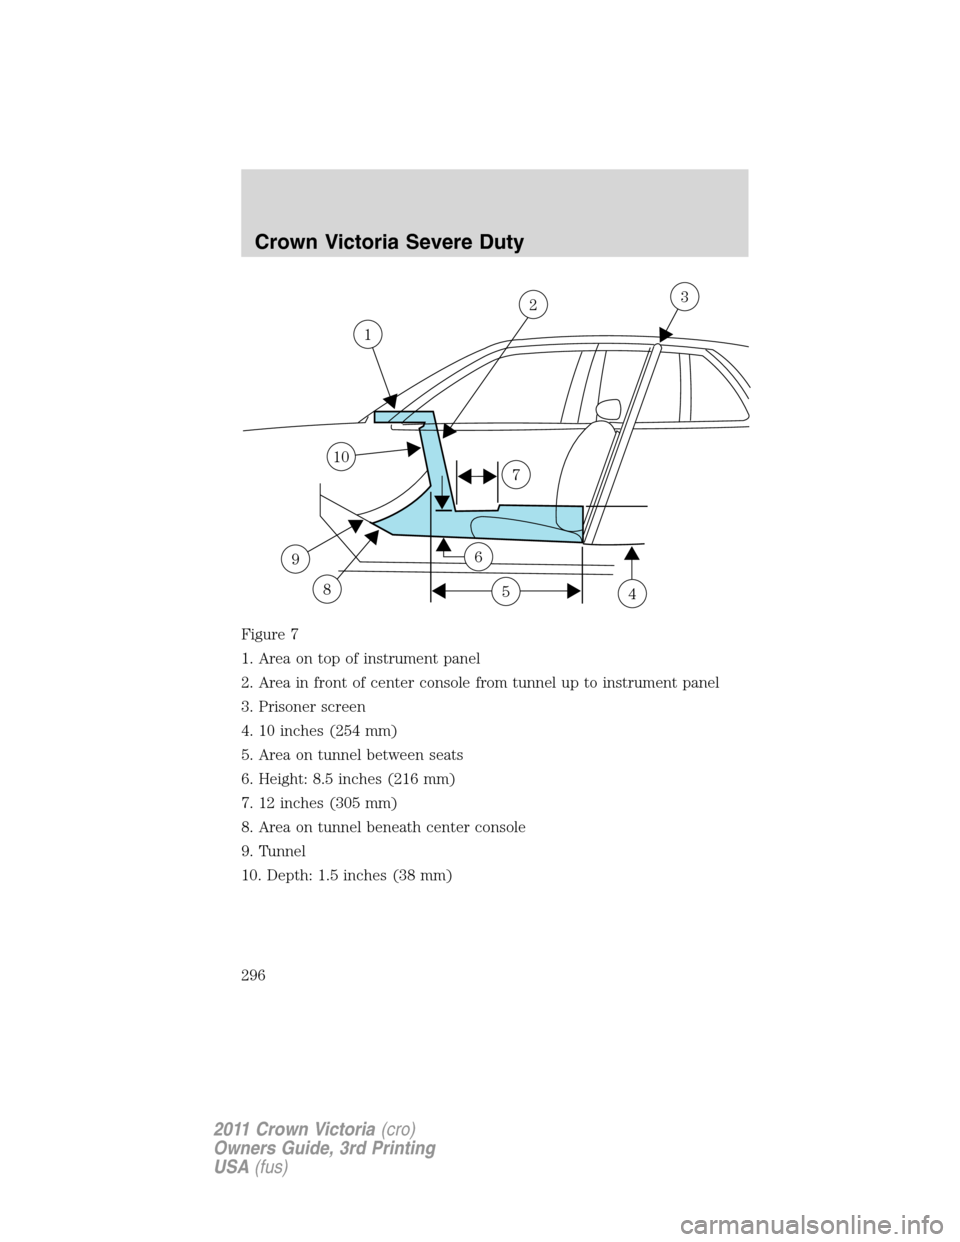 FORD CROWN VICTORIA 2011 2.G Owners Manual Figure 7
1. Area on top of instrument panel
2. Area in front of center console from tunnel up to instrument panel
3. Prisoner screen
4. 10 inches (254 mm)
5. Area on tunnel between seats
6. Height: 8.